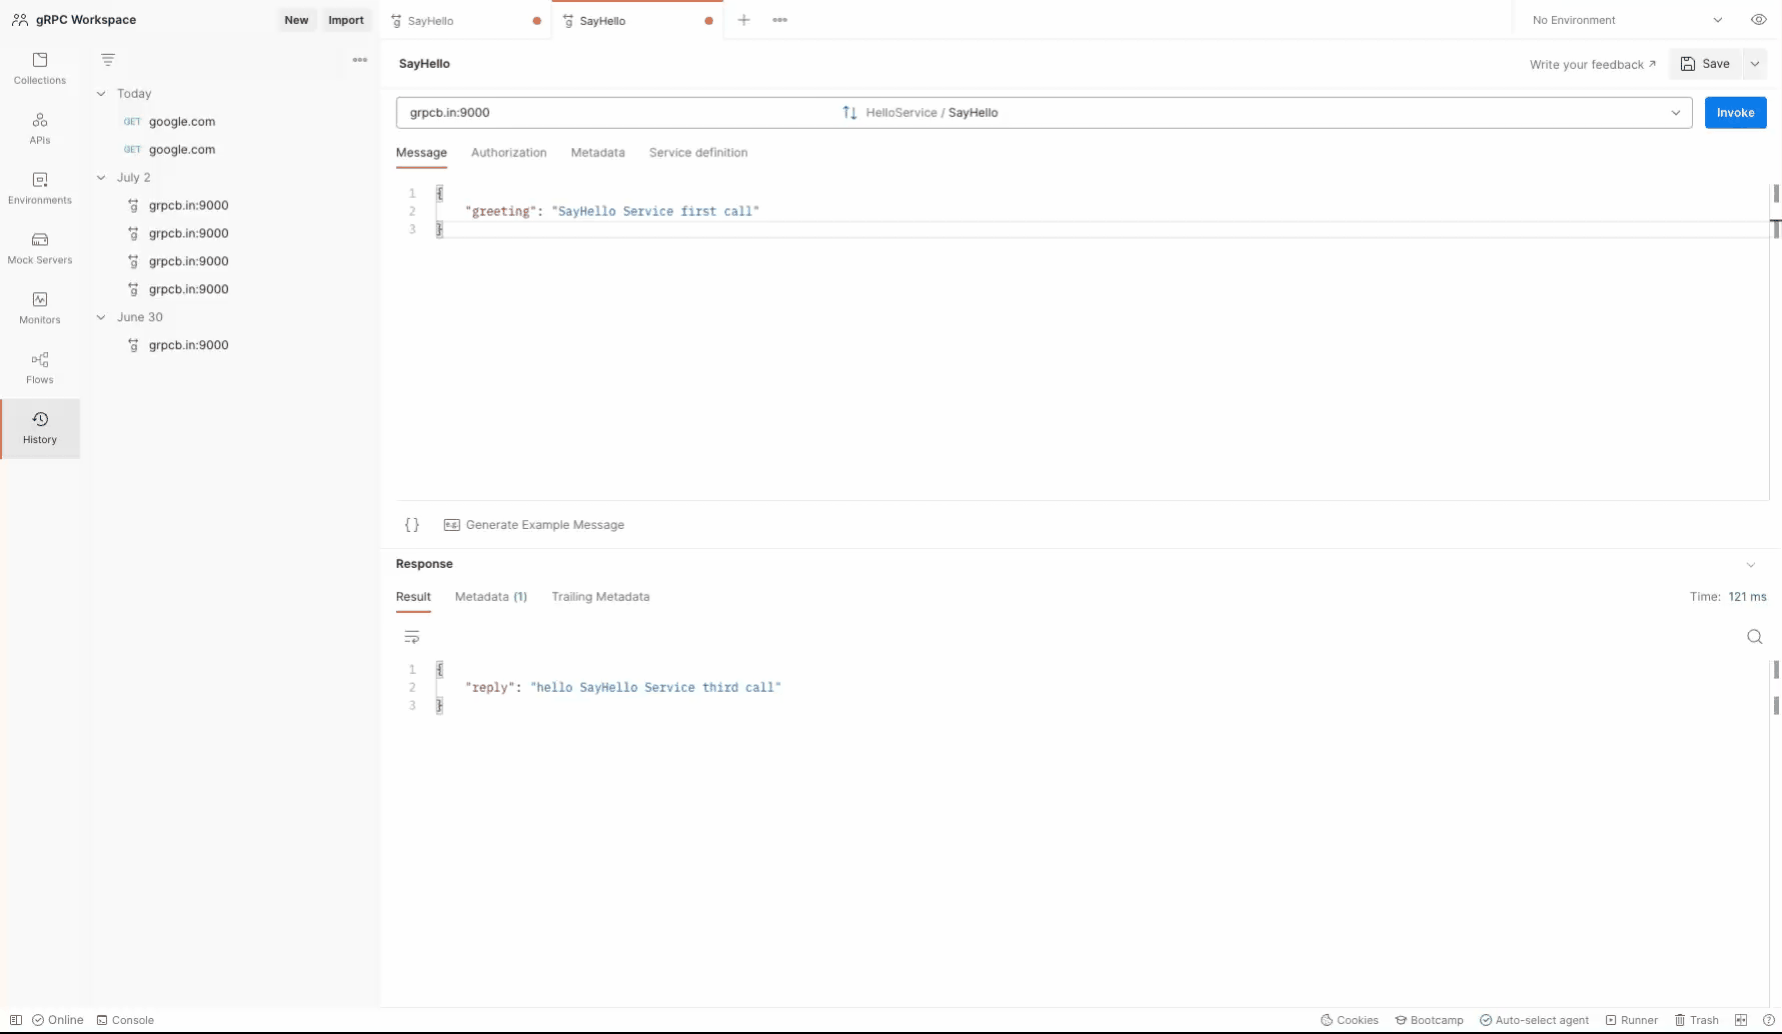 Showing off request history